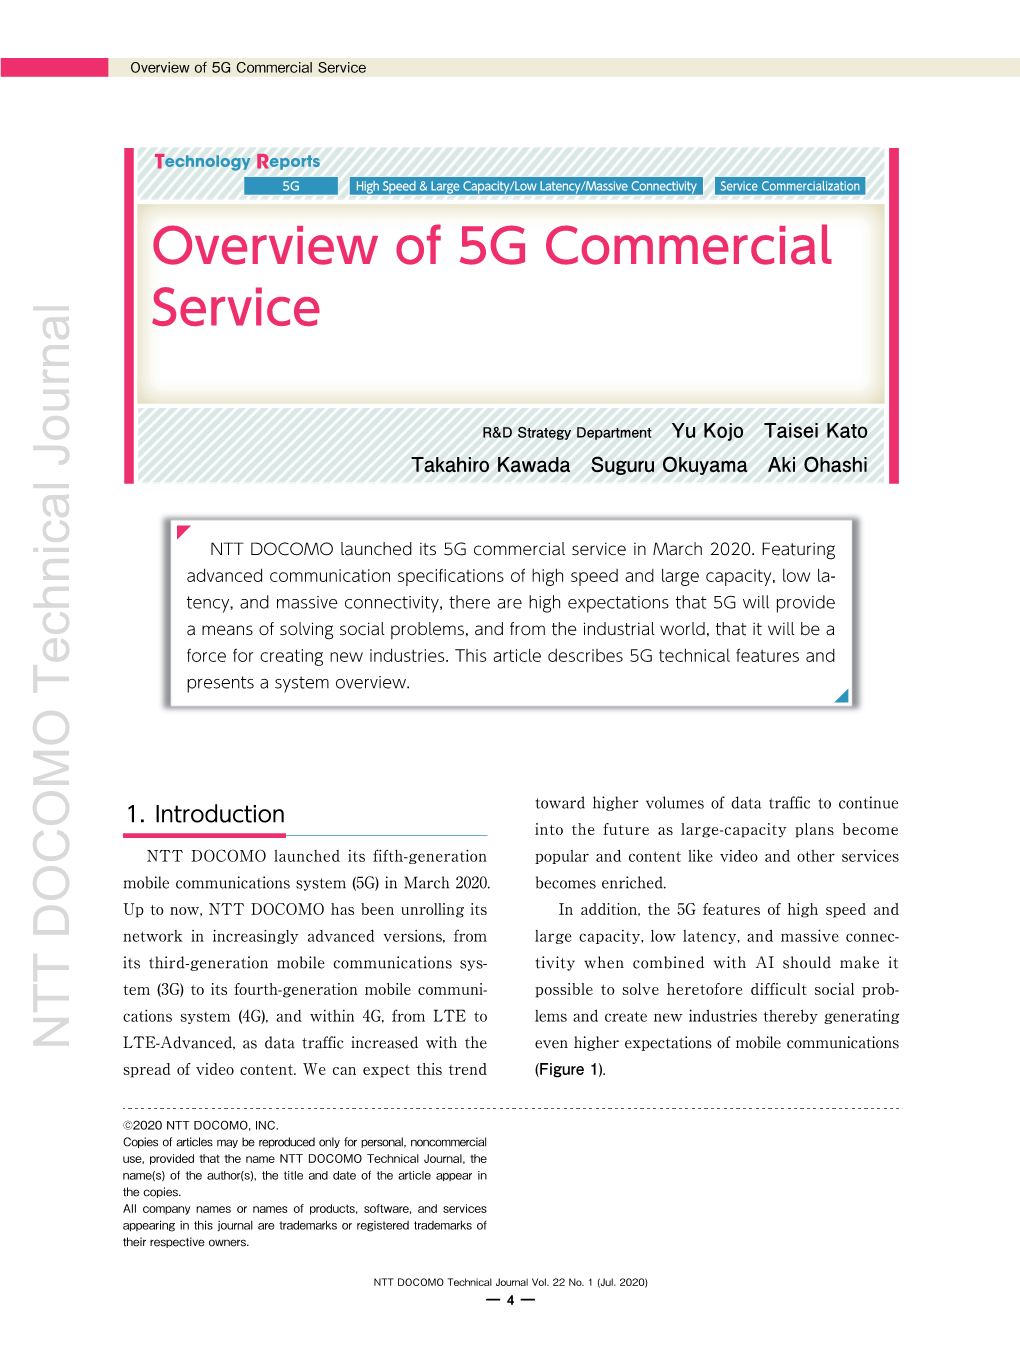 Overview of 5G Commercial Service